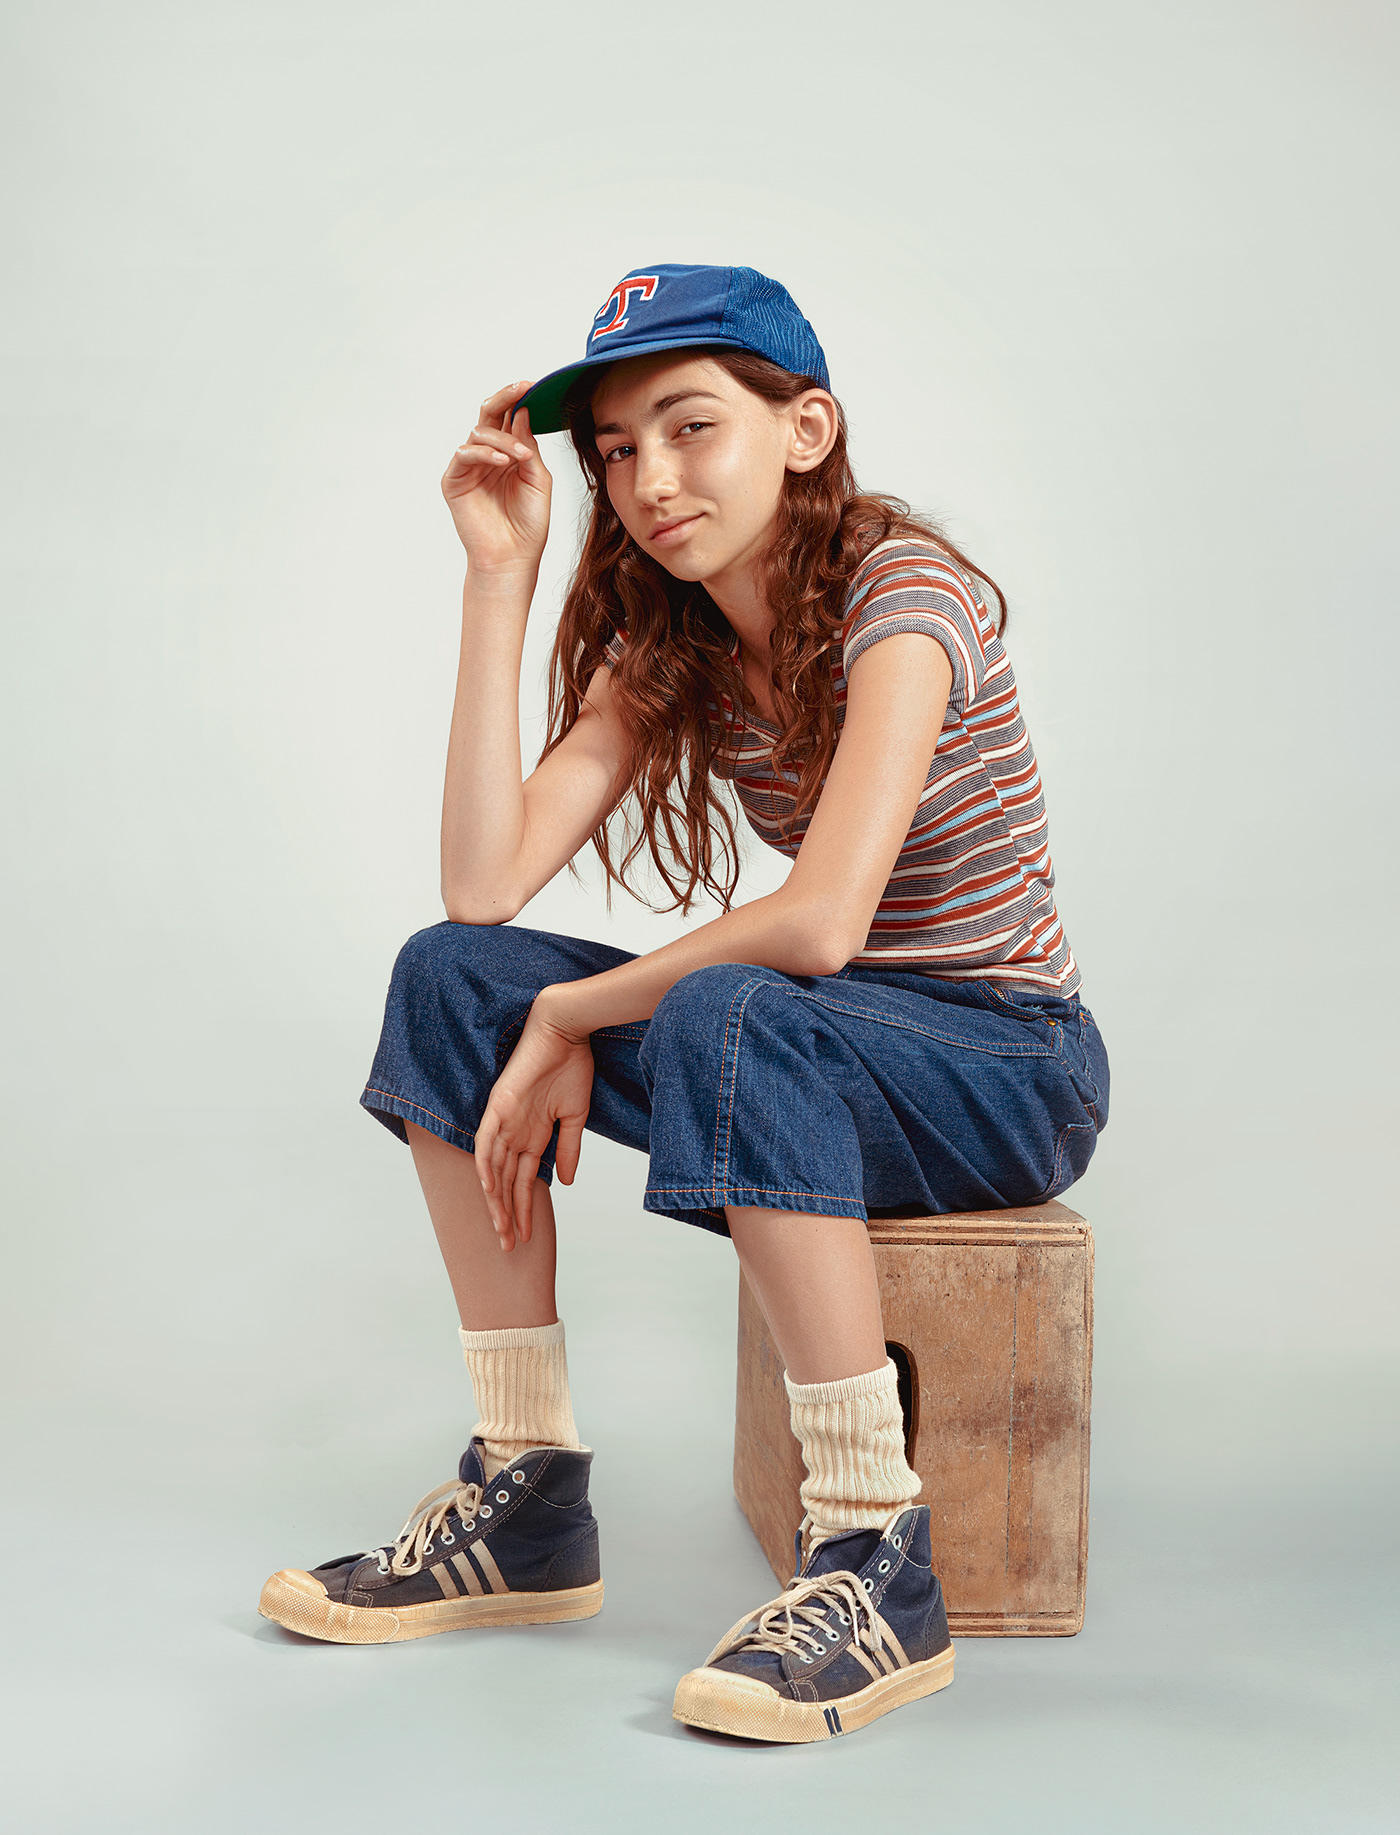 determined girl teen sports Character conceptual baseball Advertising  portrait series